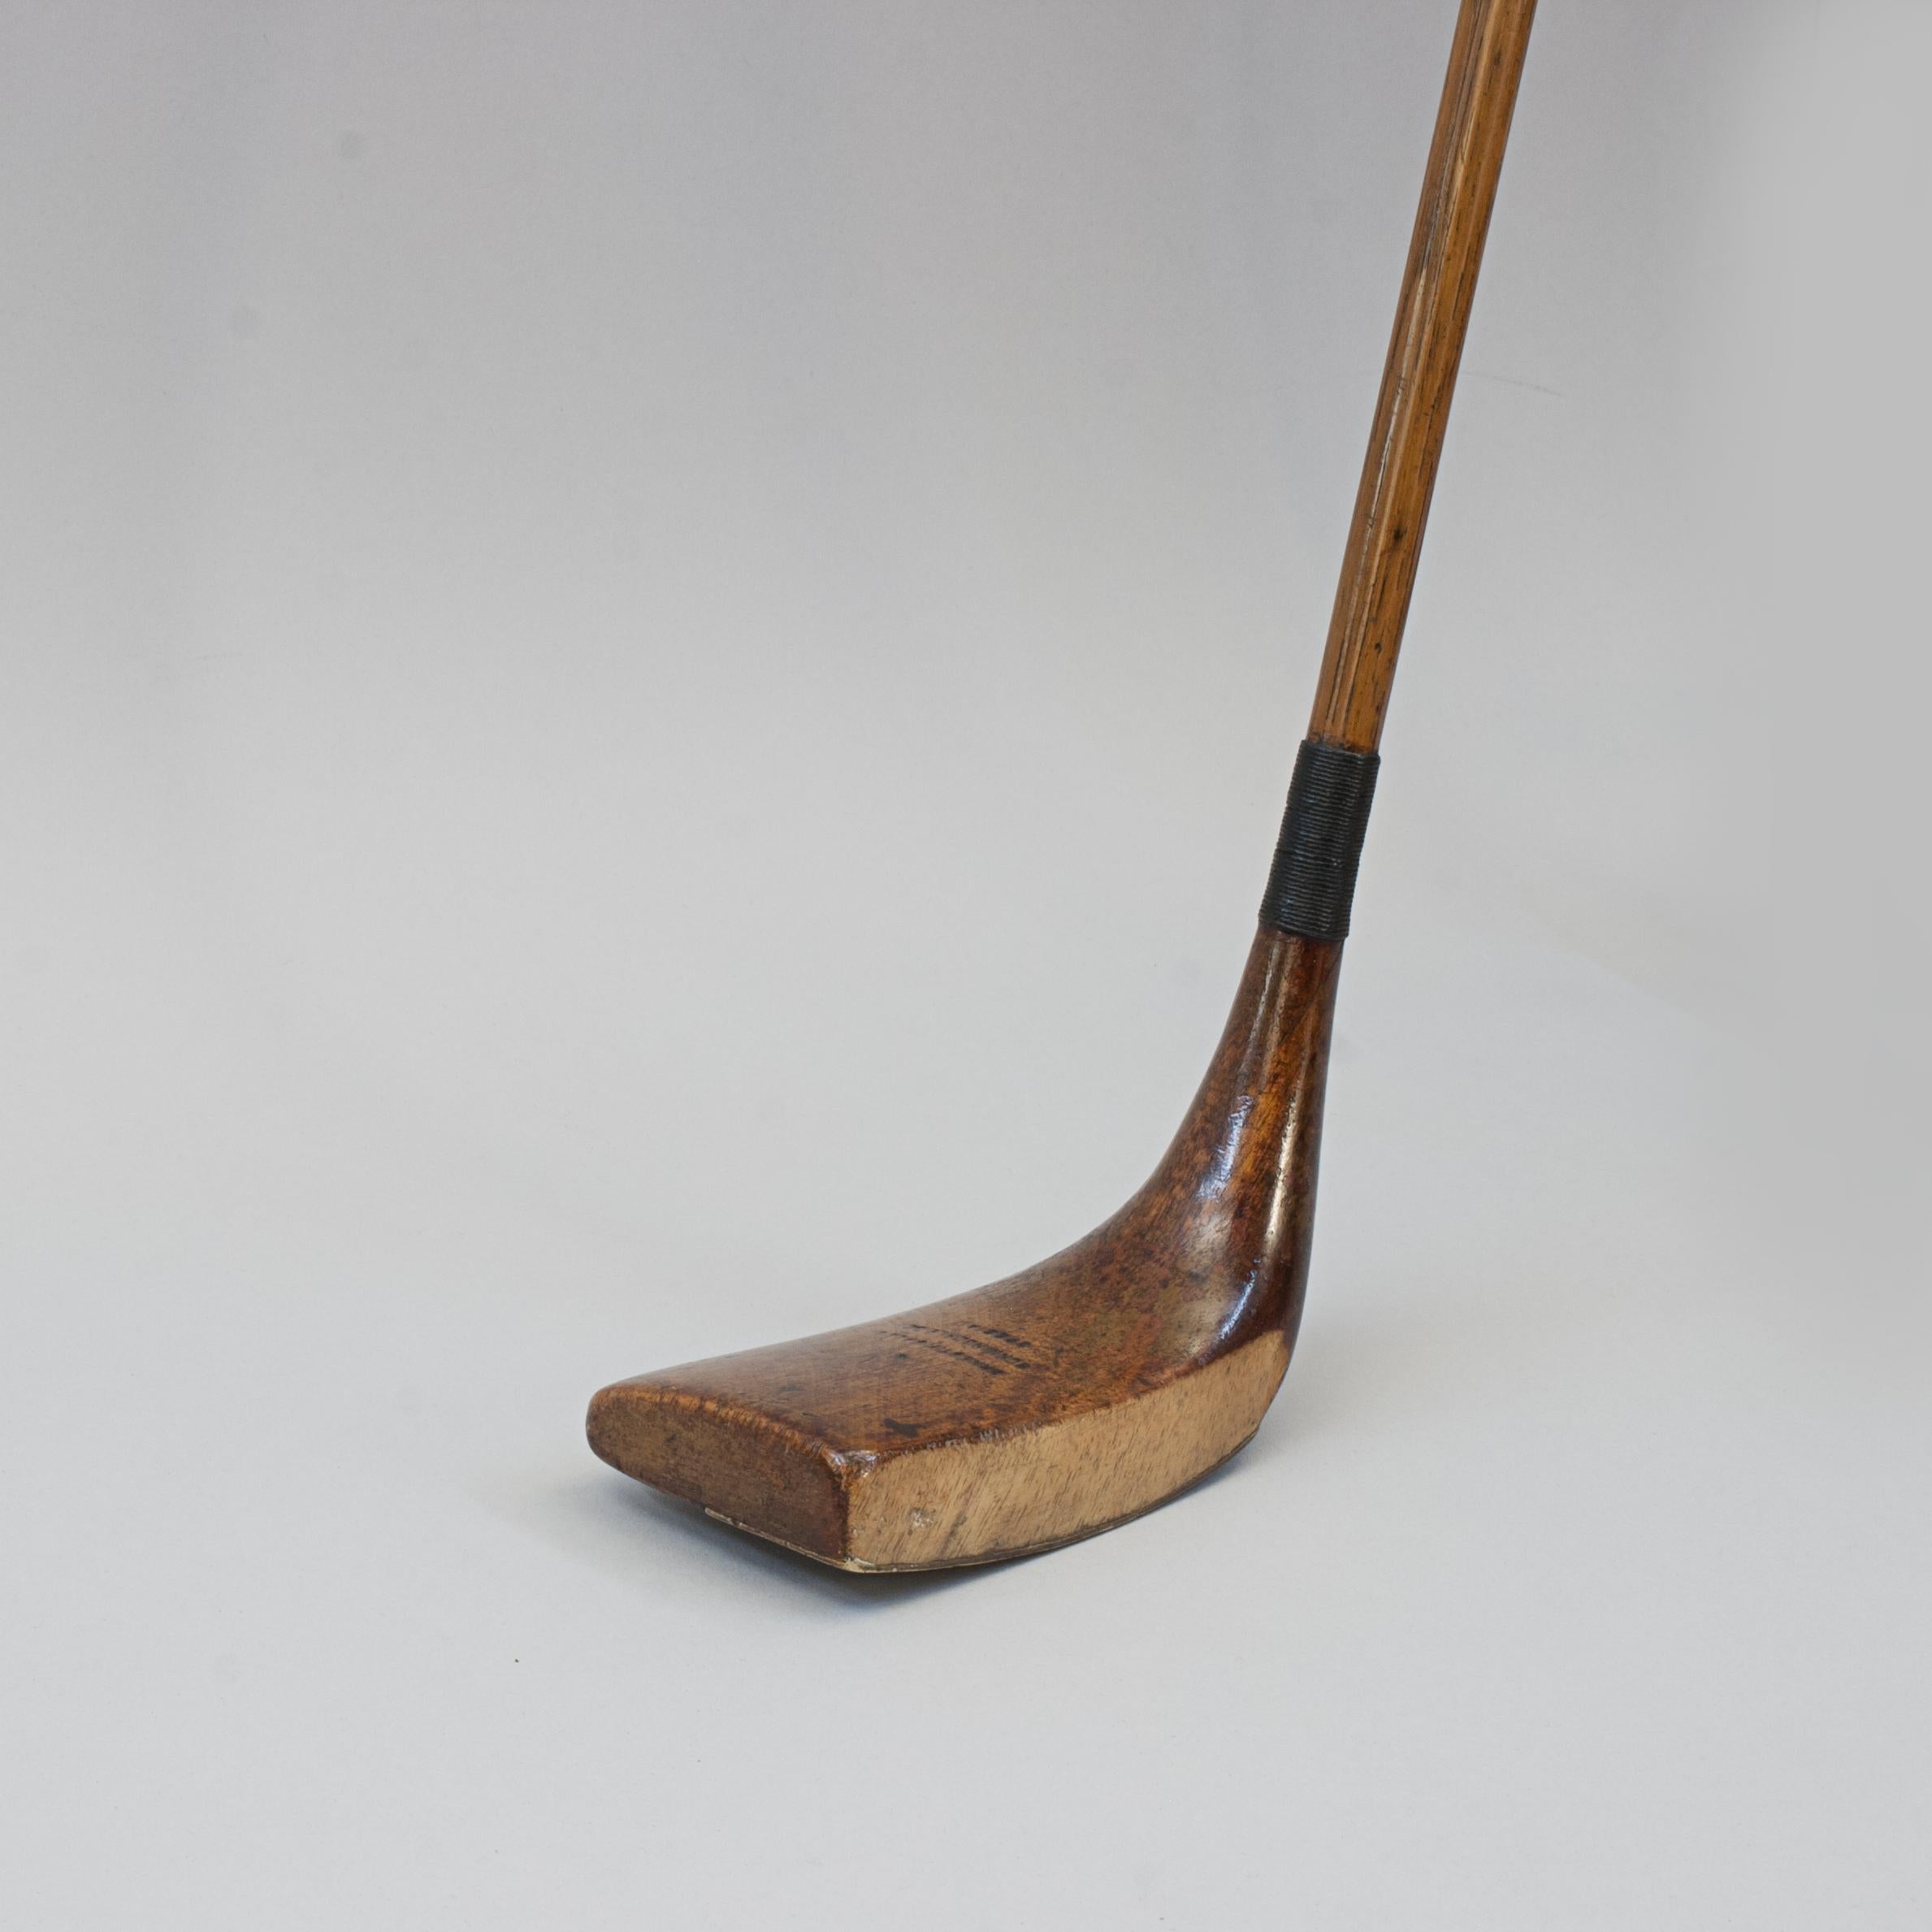 Antique Gassiat Style Putter, Ernest F. Sales, Sunningdale.
A good example of a hickory shafted persimmon wood 'Jean Gassiat' type putter with a polished leather 'pistol grip'. The makers name is stamped on the crown of the club 'Ernest F. Sales,